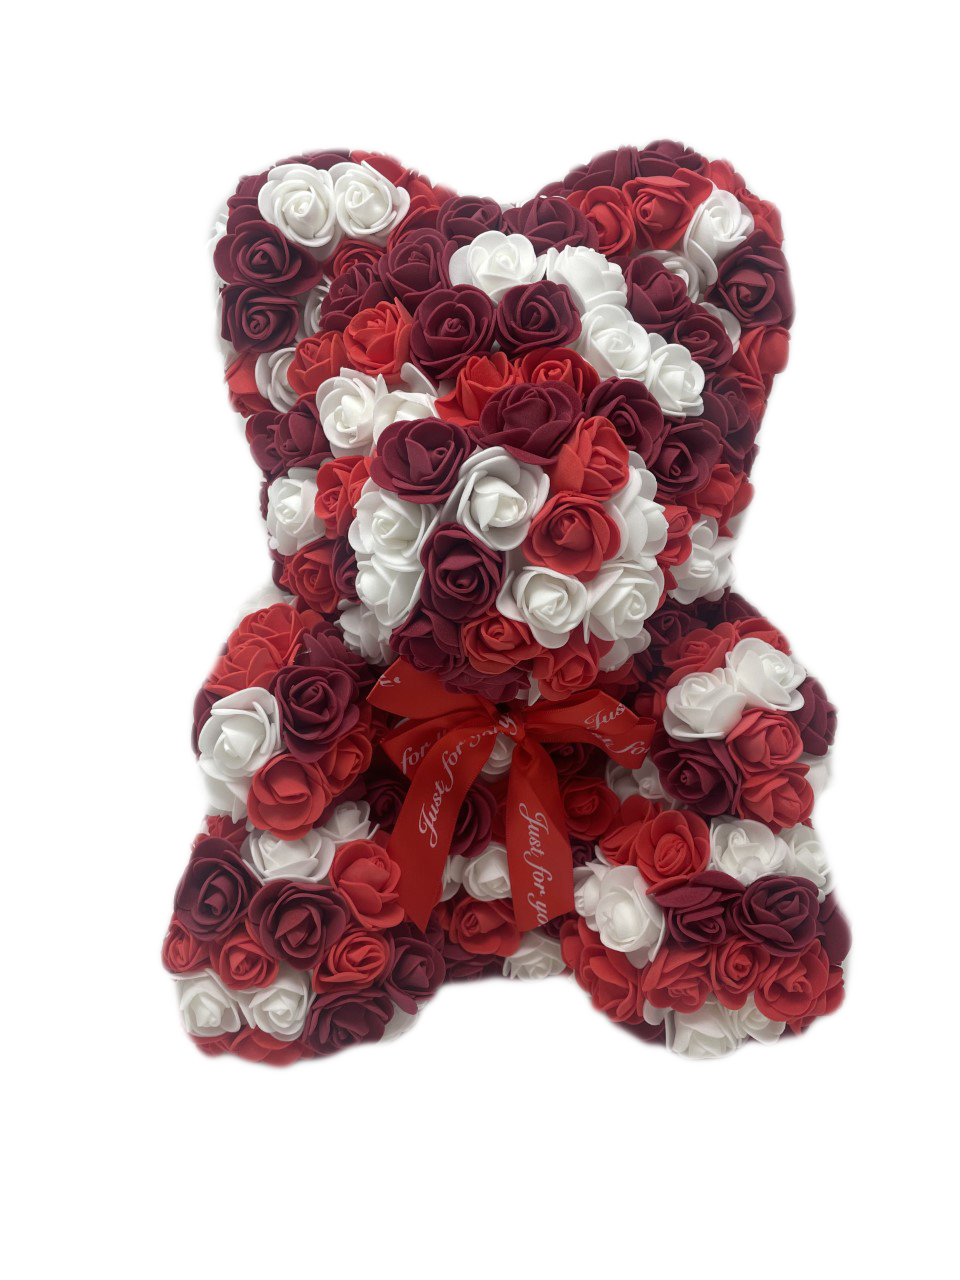 12 inch Bear<br/>Quantity Available:100 pcs 